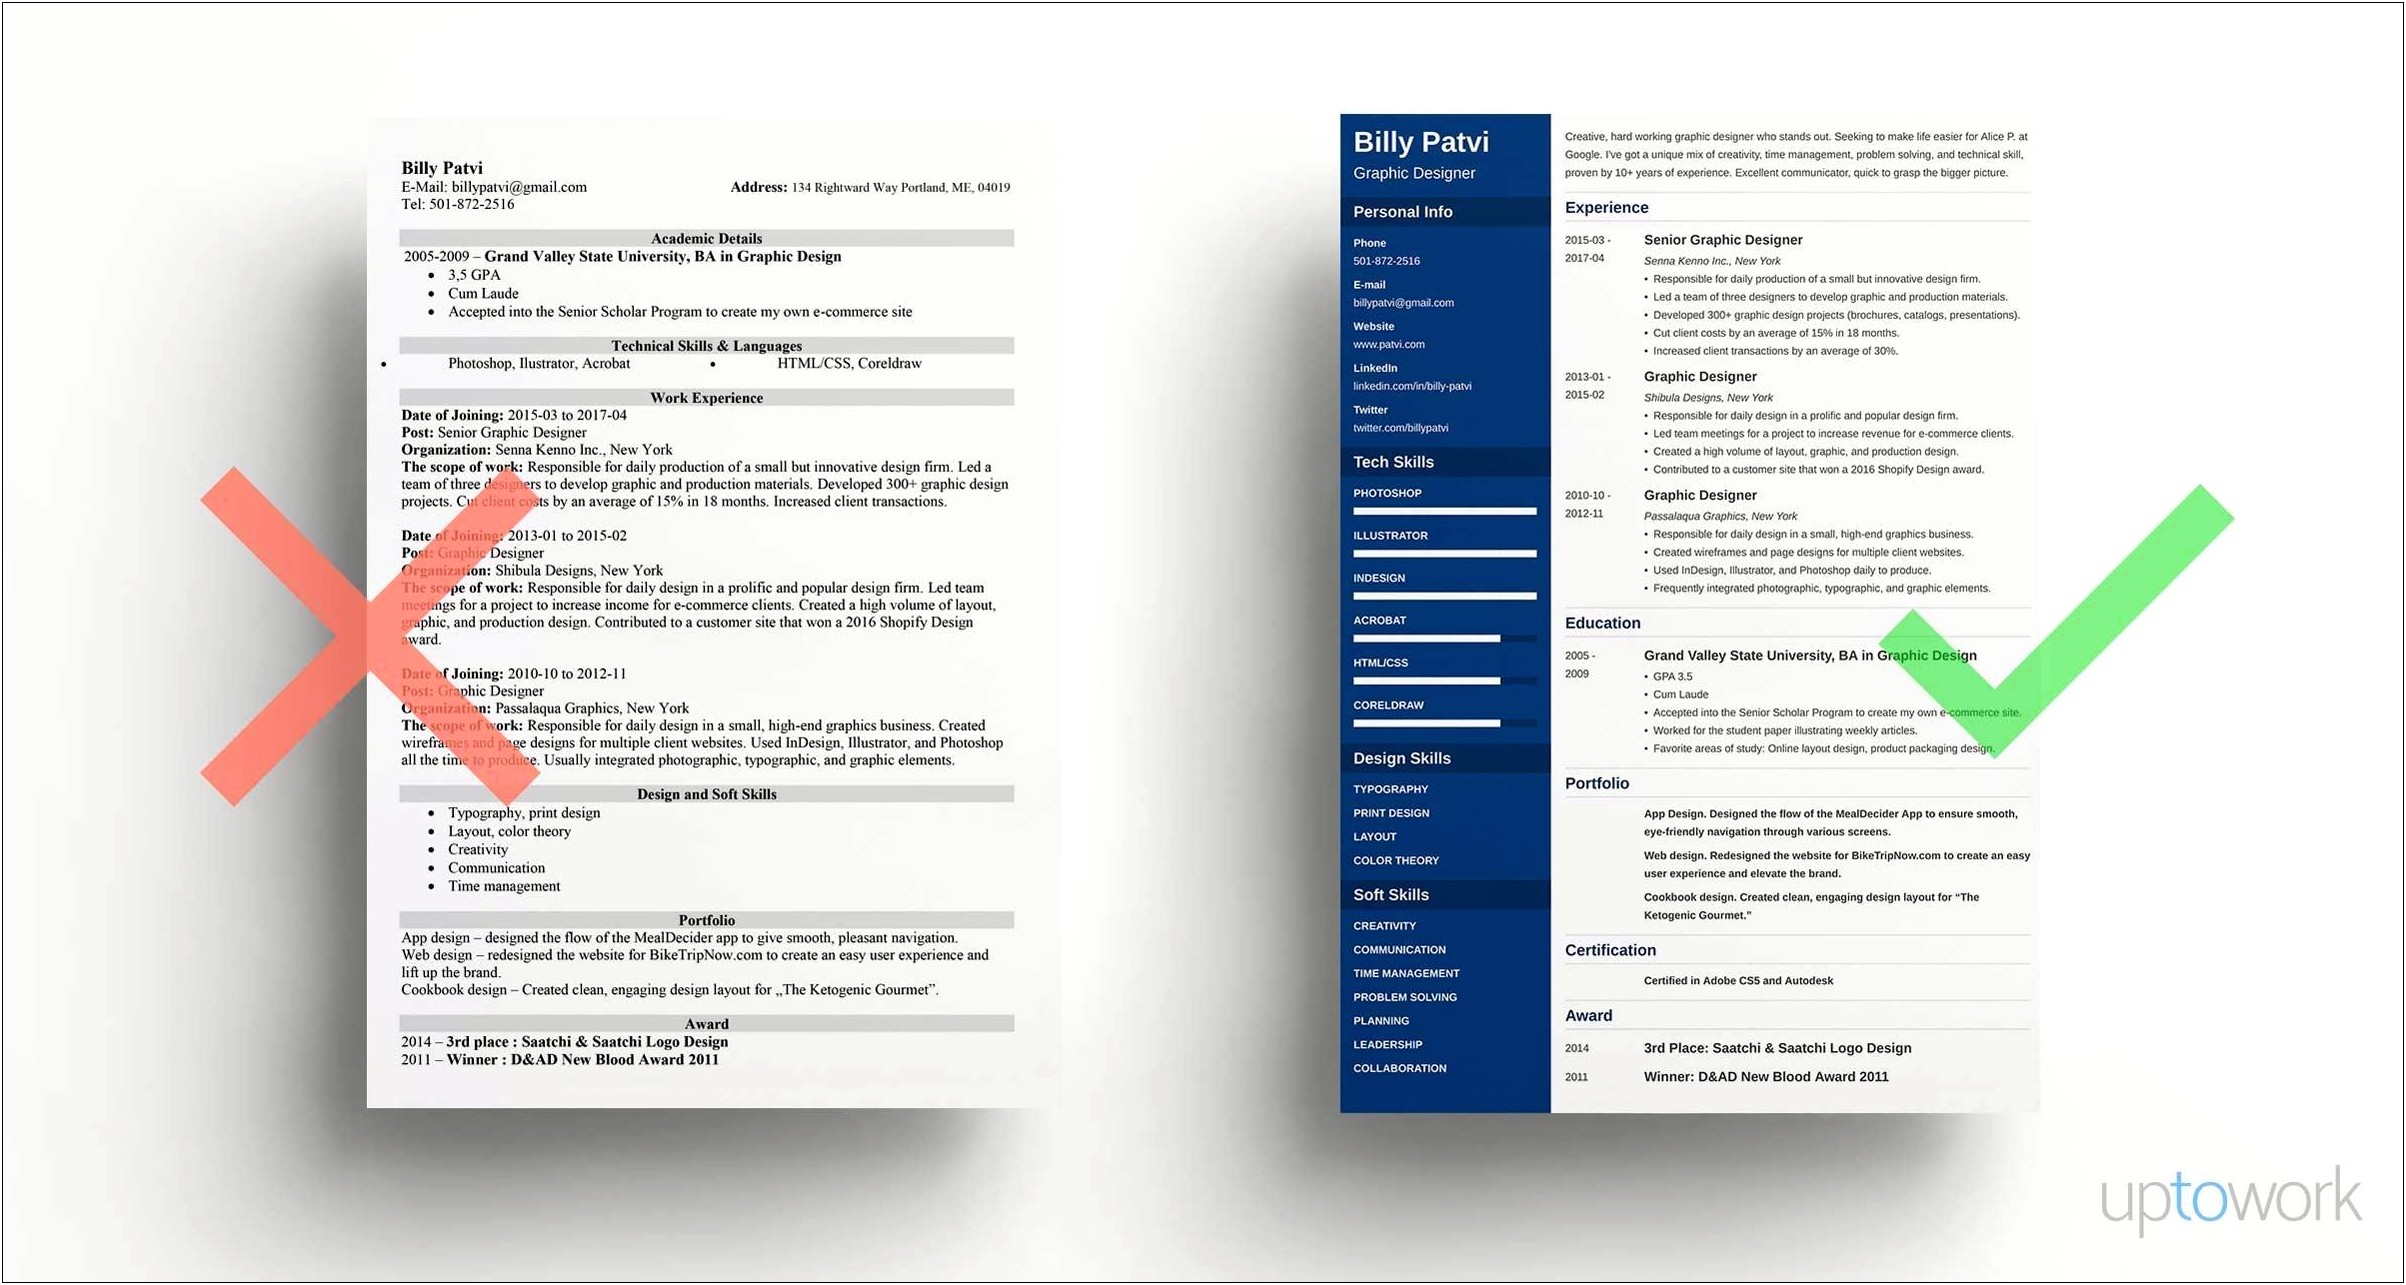 The Best Resume Format For A Graphic Designer